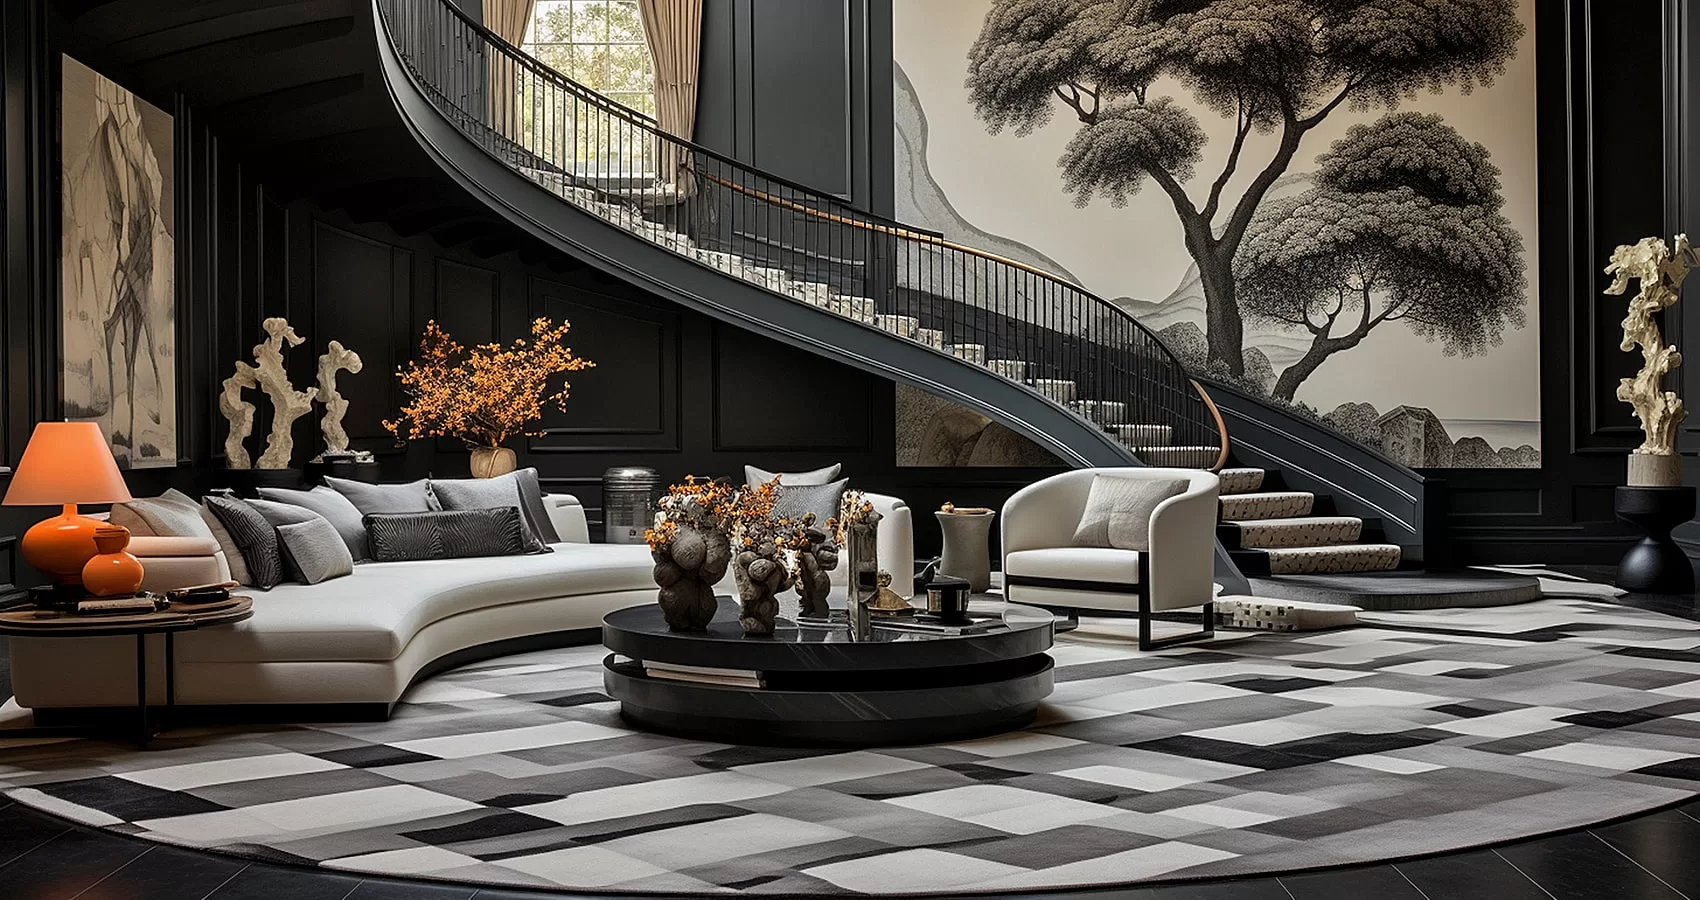 Black and White Living Room | Luxury Black and White Living Room | Black and White Living Room Decor | Black and White Living Room Ideas